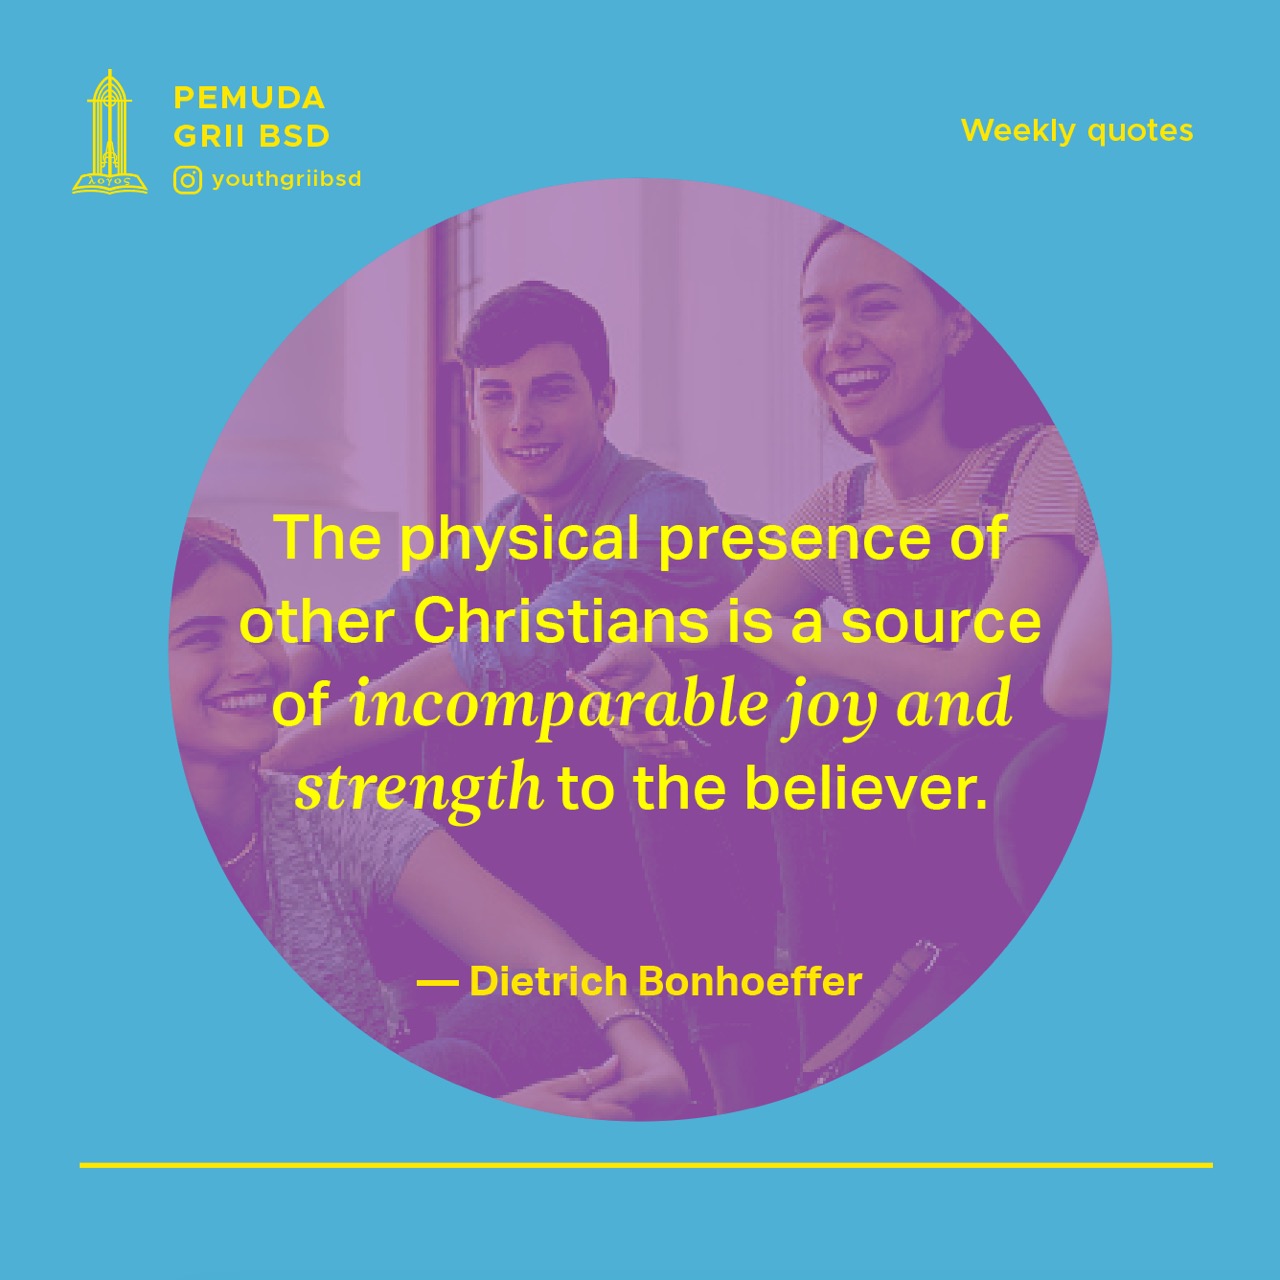 The physical presence of other Christians is a source of incomparable joy and strength to the believer.